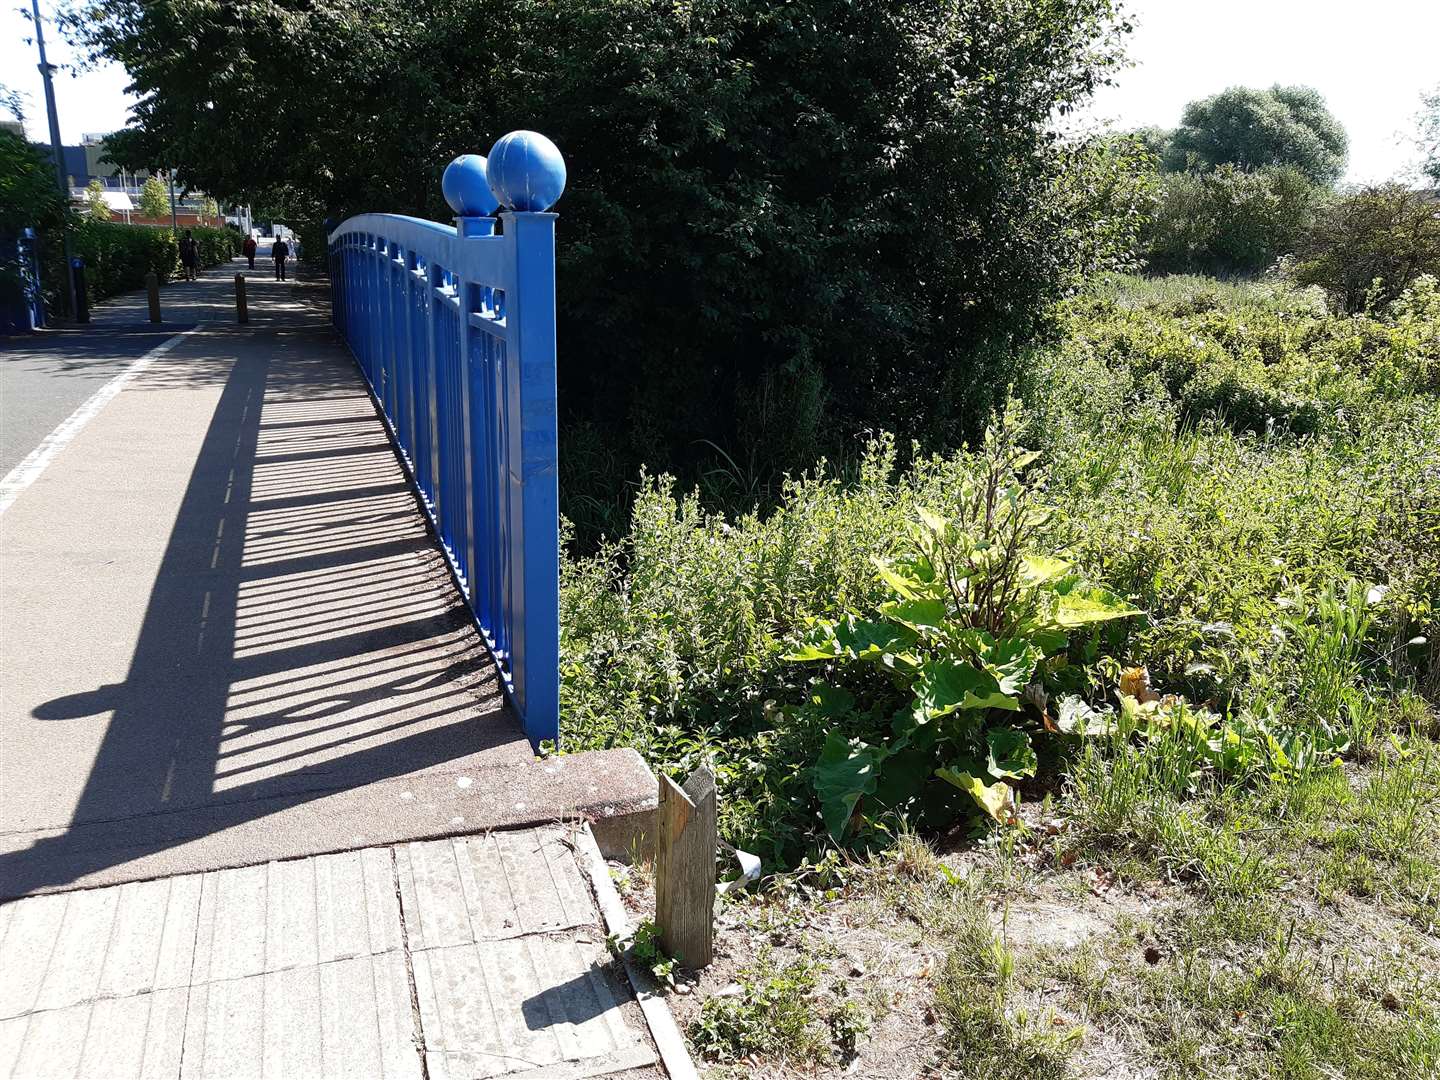 There is a gap in the fencing on both sides of this footbridge leading to Victoria Park